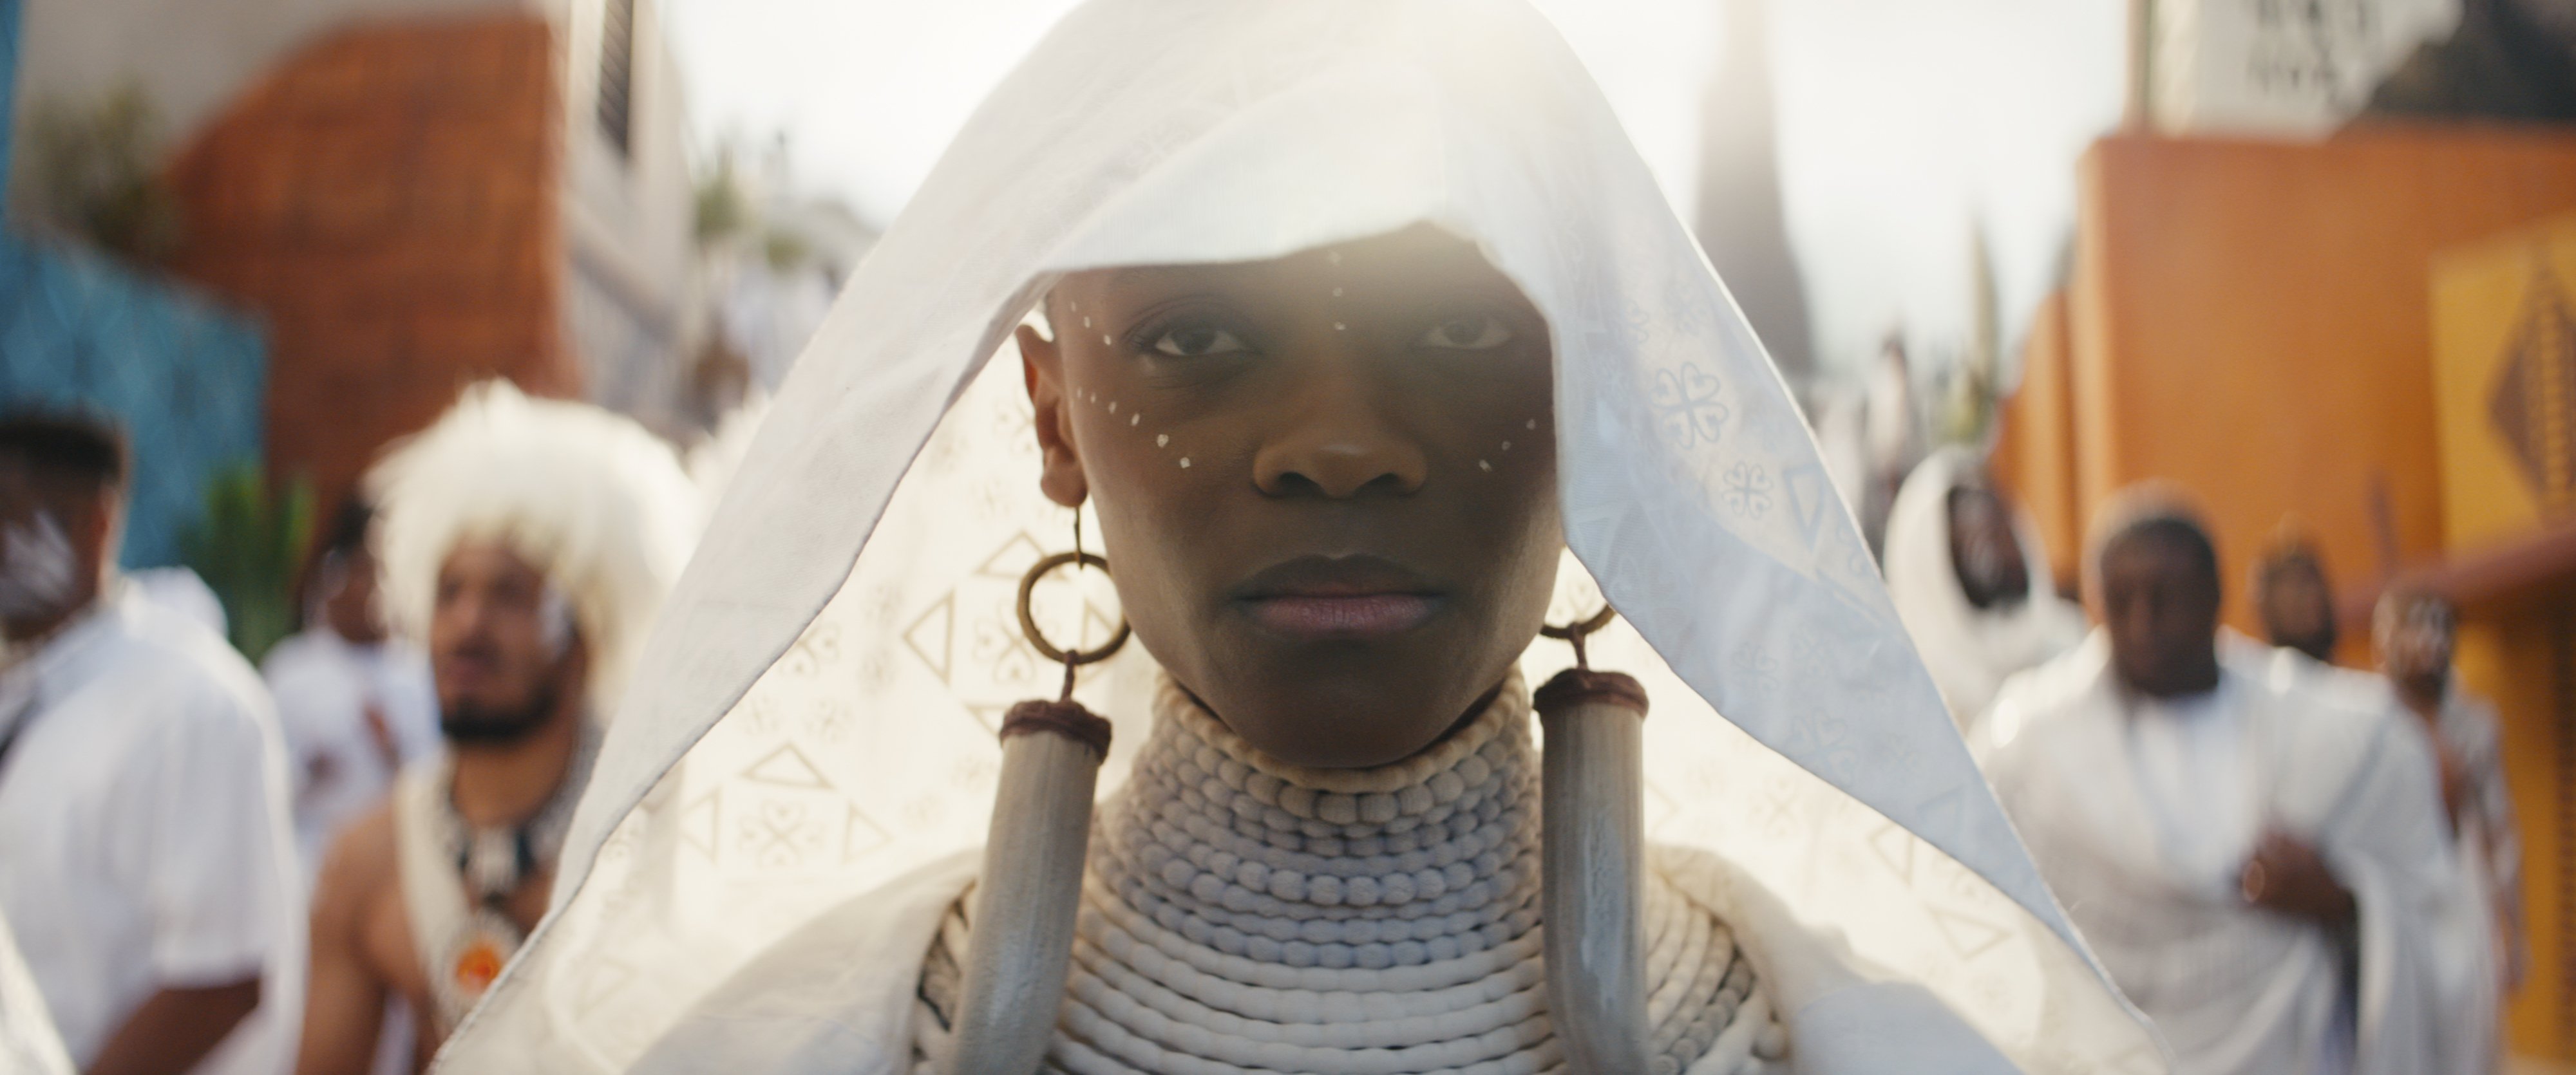 A young Black woman in a white mourning costume.